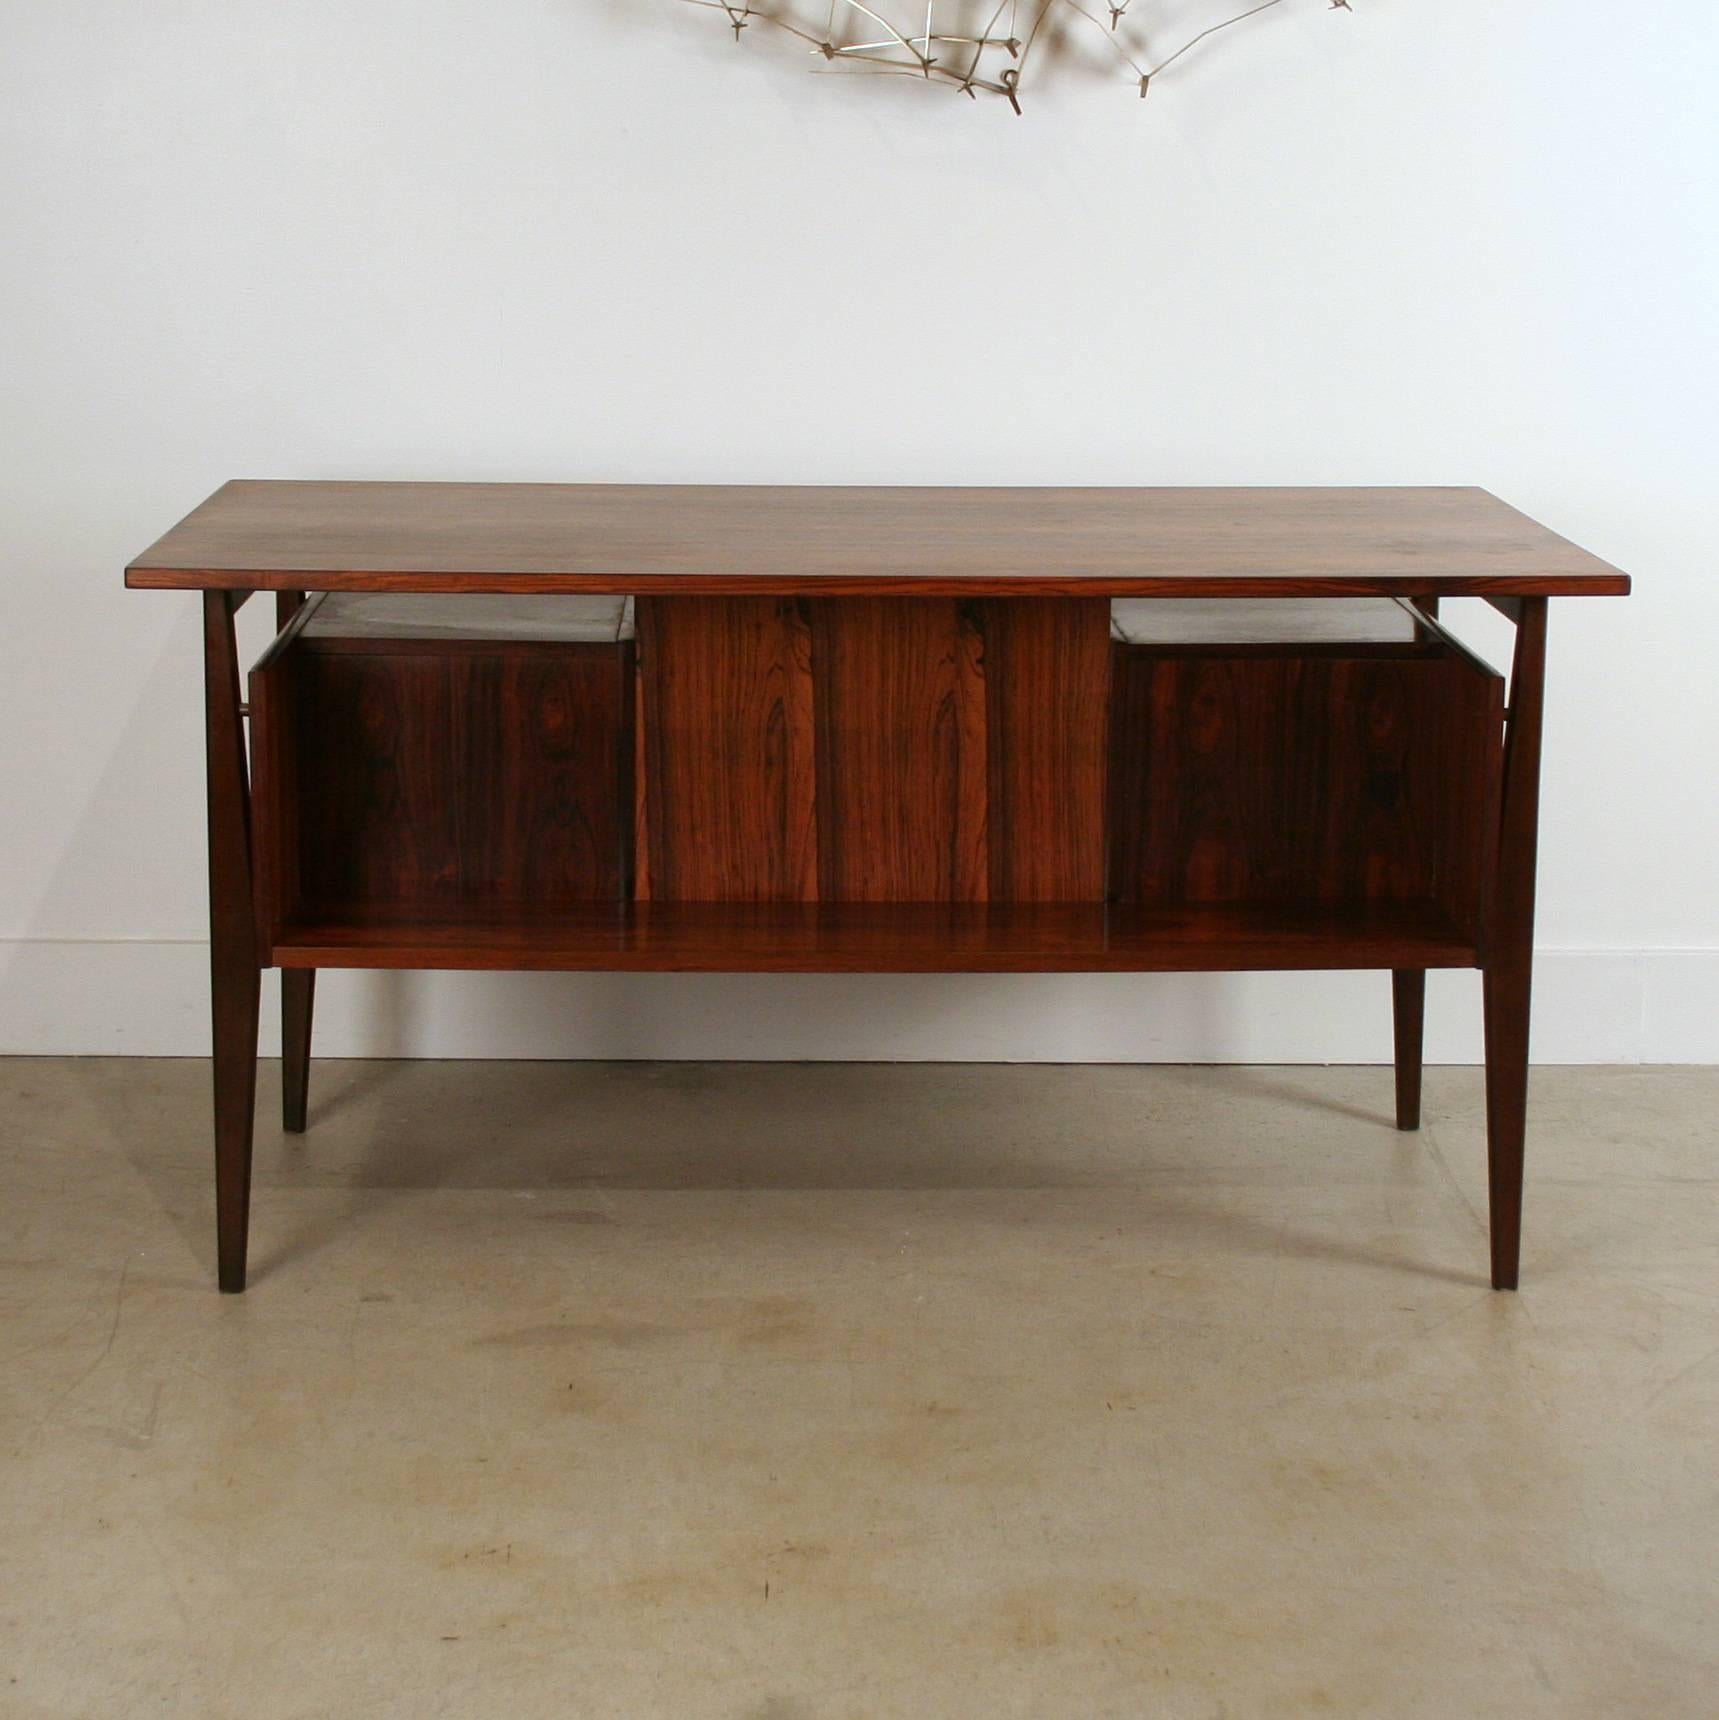 Absolutely stunning vintage rosewood desk. The rosewood graining on this piece is simply one of a kind. The desk features three drawers on each flank with inset finger pulls and dovetail joinery. The back of the desk also has a large shelf which